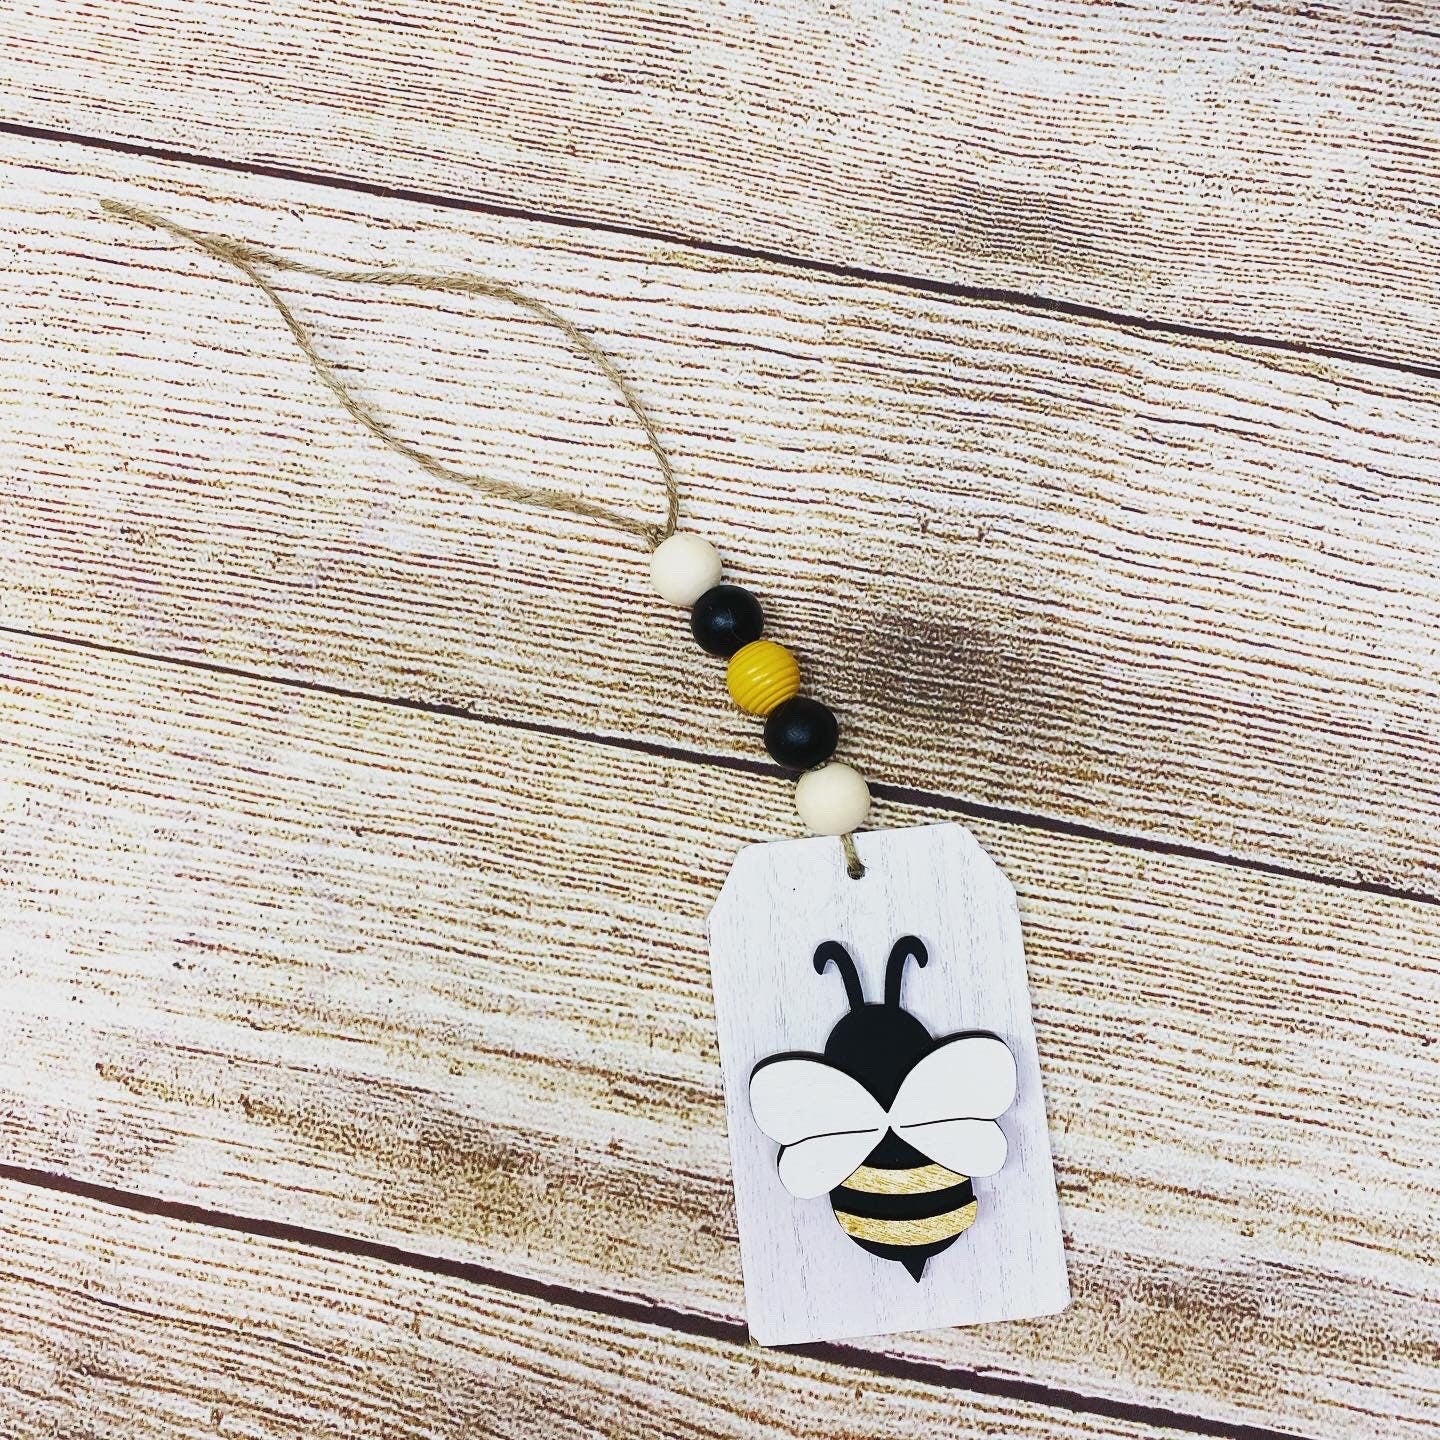 Bee Tiered Tray Garland Tag